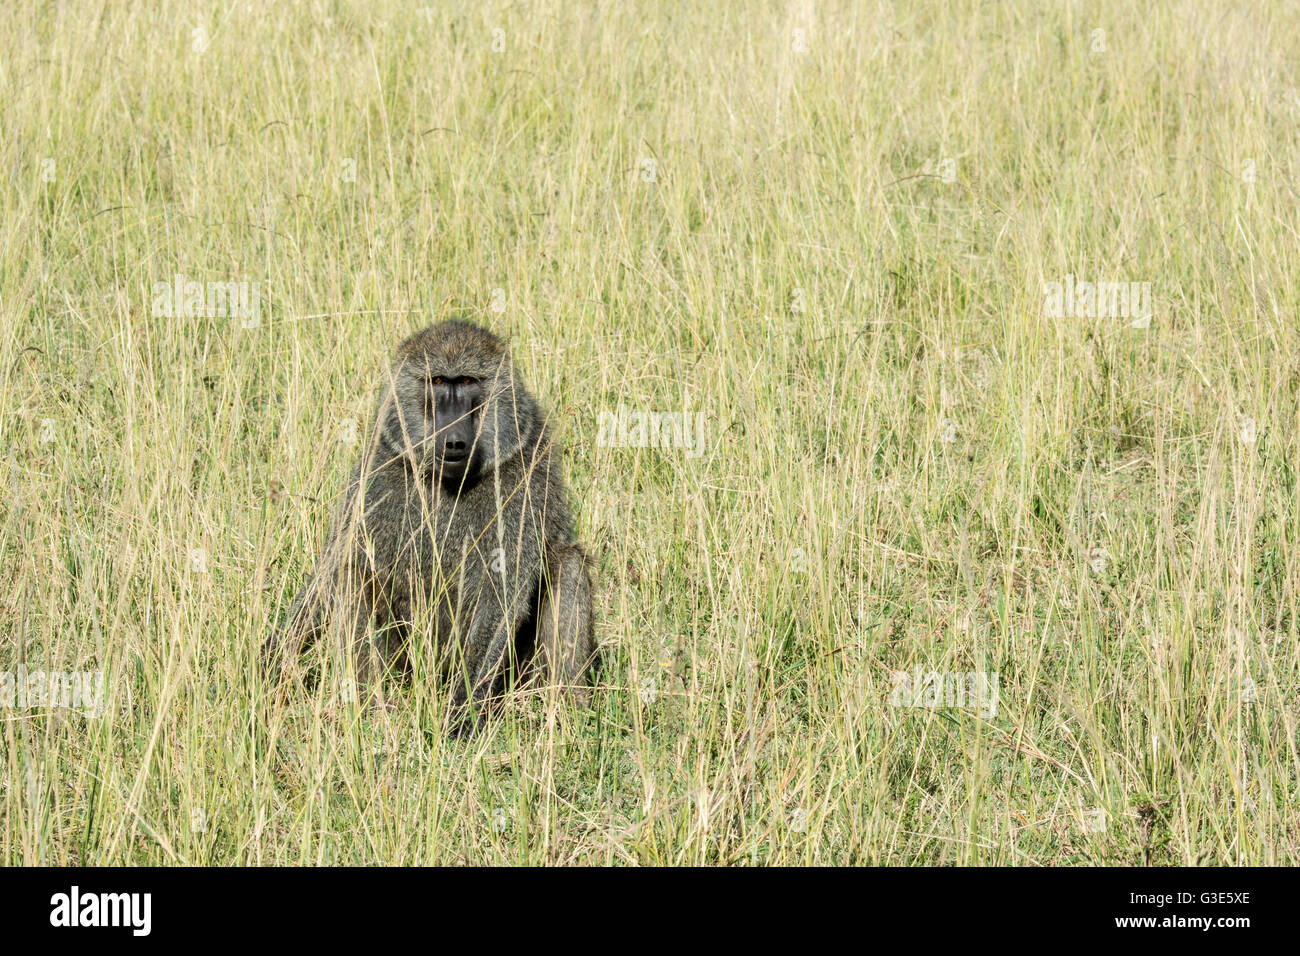 One Solitary Adult Wild Olive Baboon, Papio anubis, sitting in tall grass in the Masai Mara National Reserve, Kenya, East Africa Stock Photo